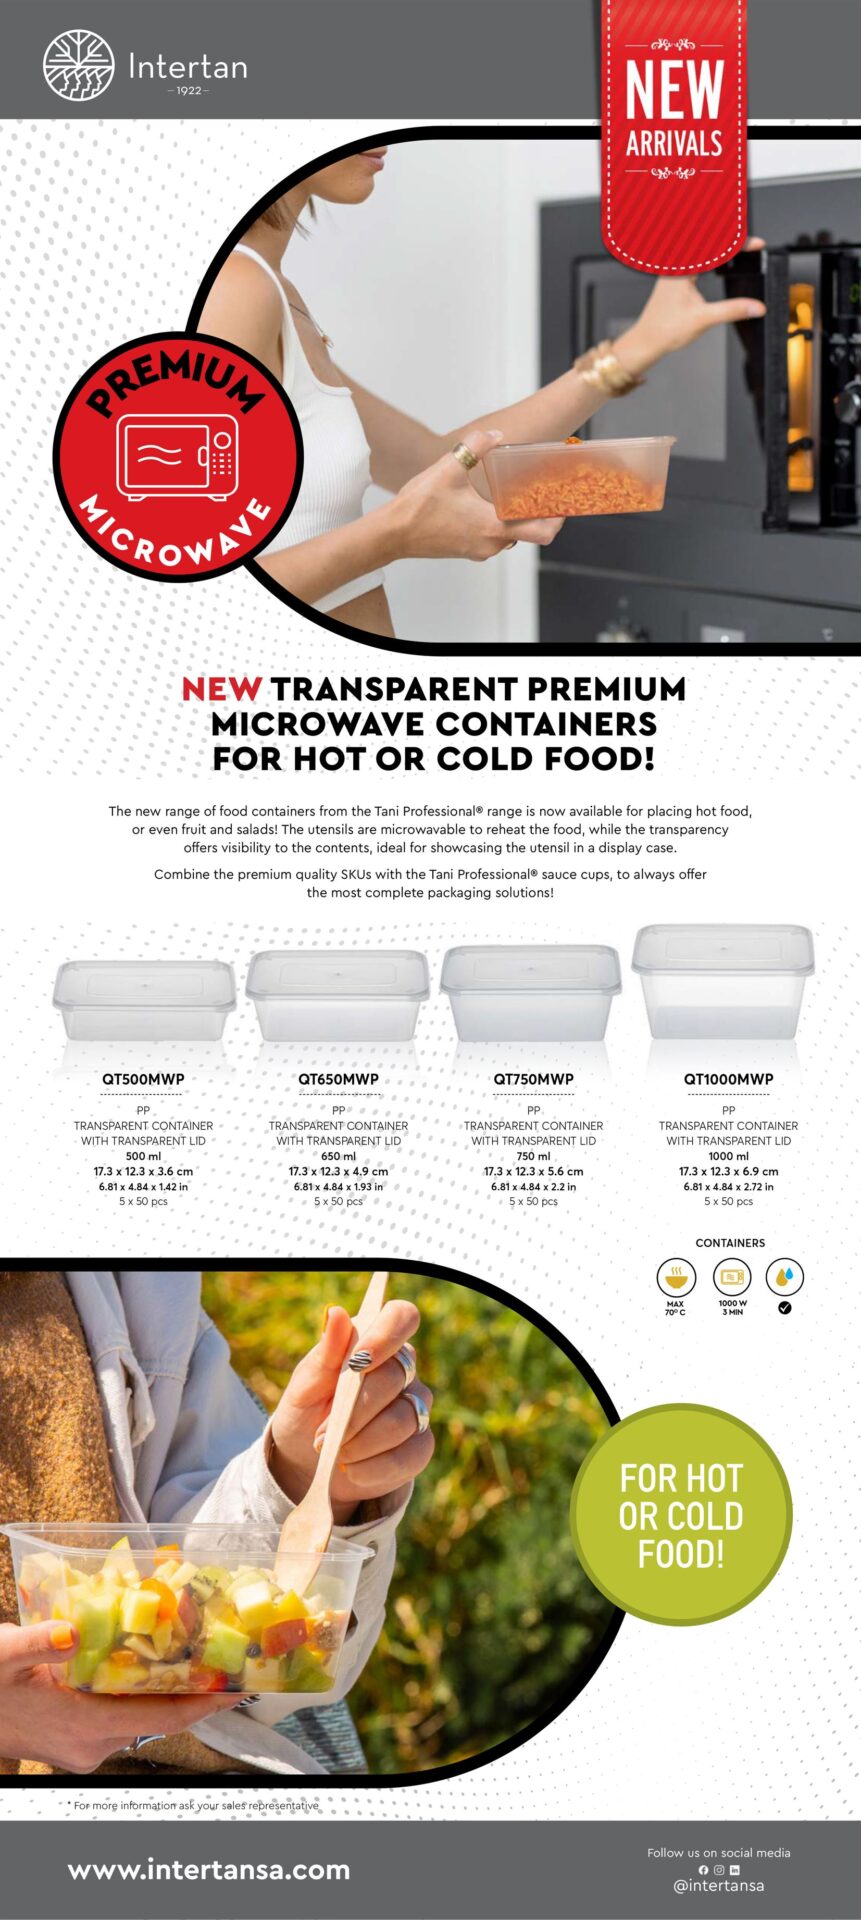 New Premium Transparent Microwave Containers Newsletter | Intertan S.A.